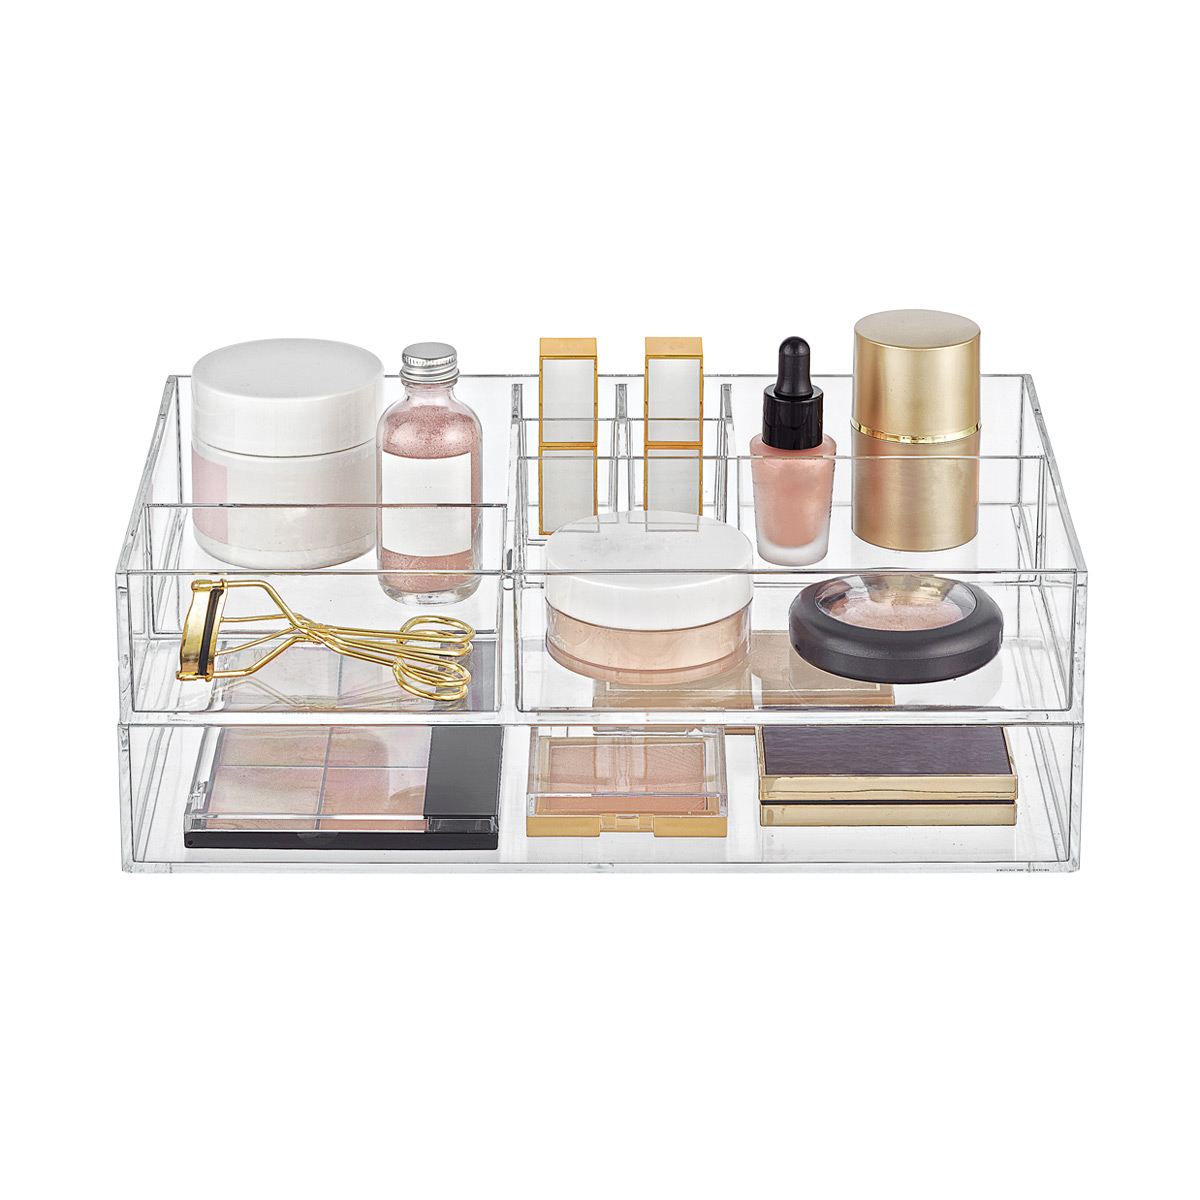 Clear Acrylic Makeup & Skin Care Storage Starter Kit | The Container Store